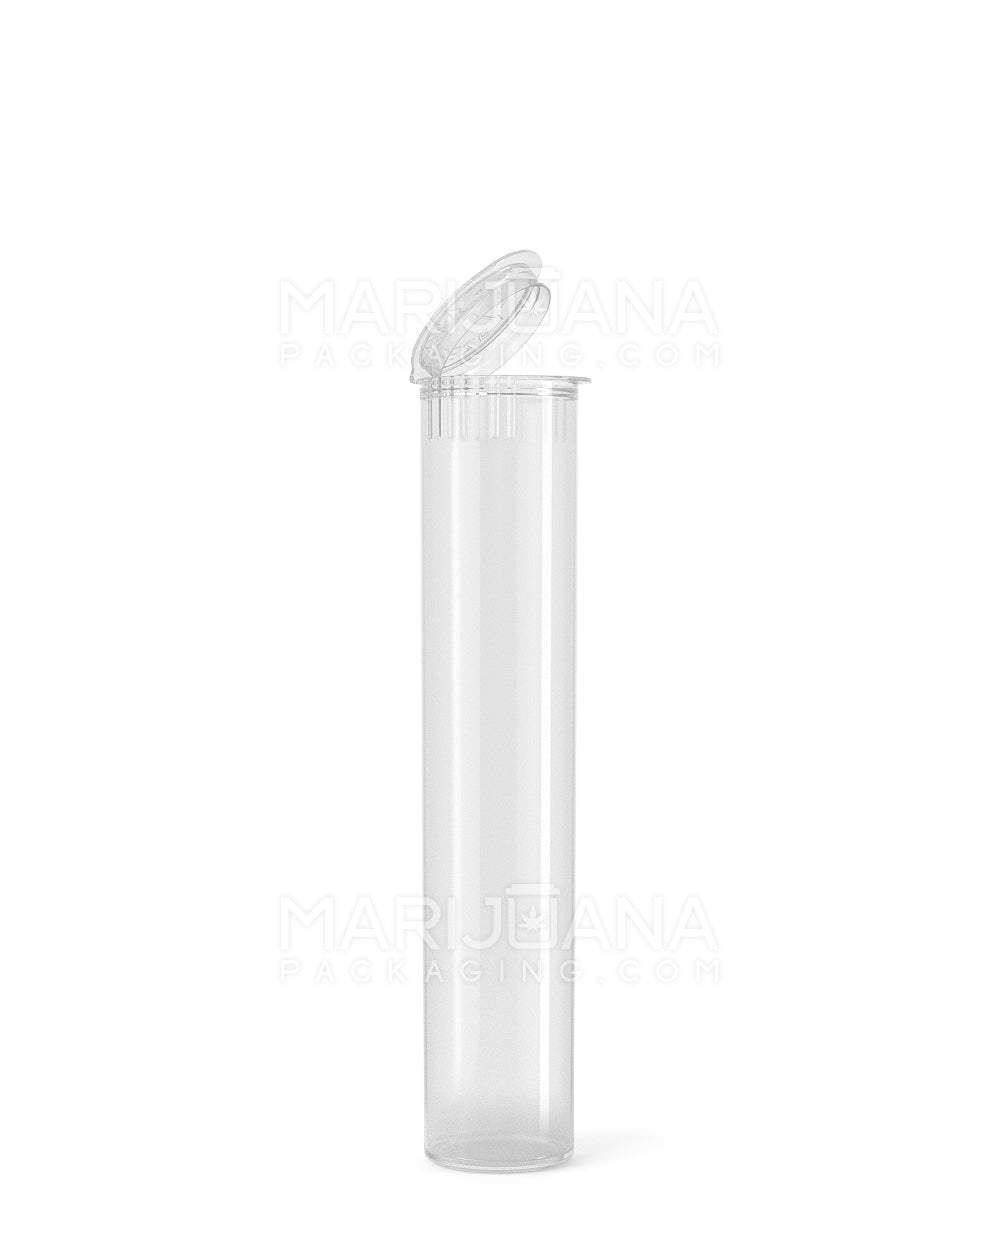 Child Resistant | Pop Top Plastic Pre-Roll Tubes | 78mm - Clear - 1200 Count - 1